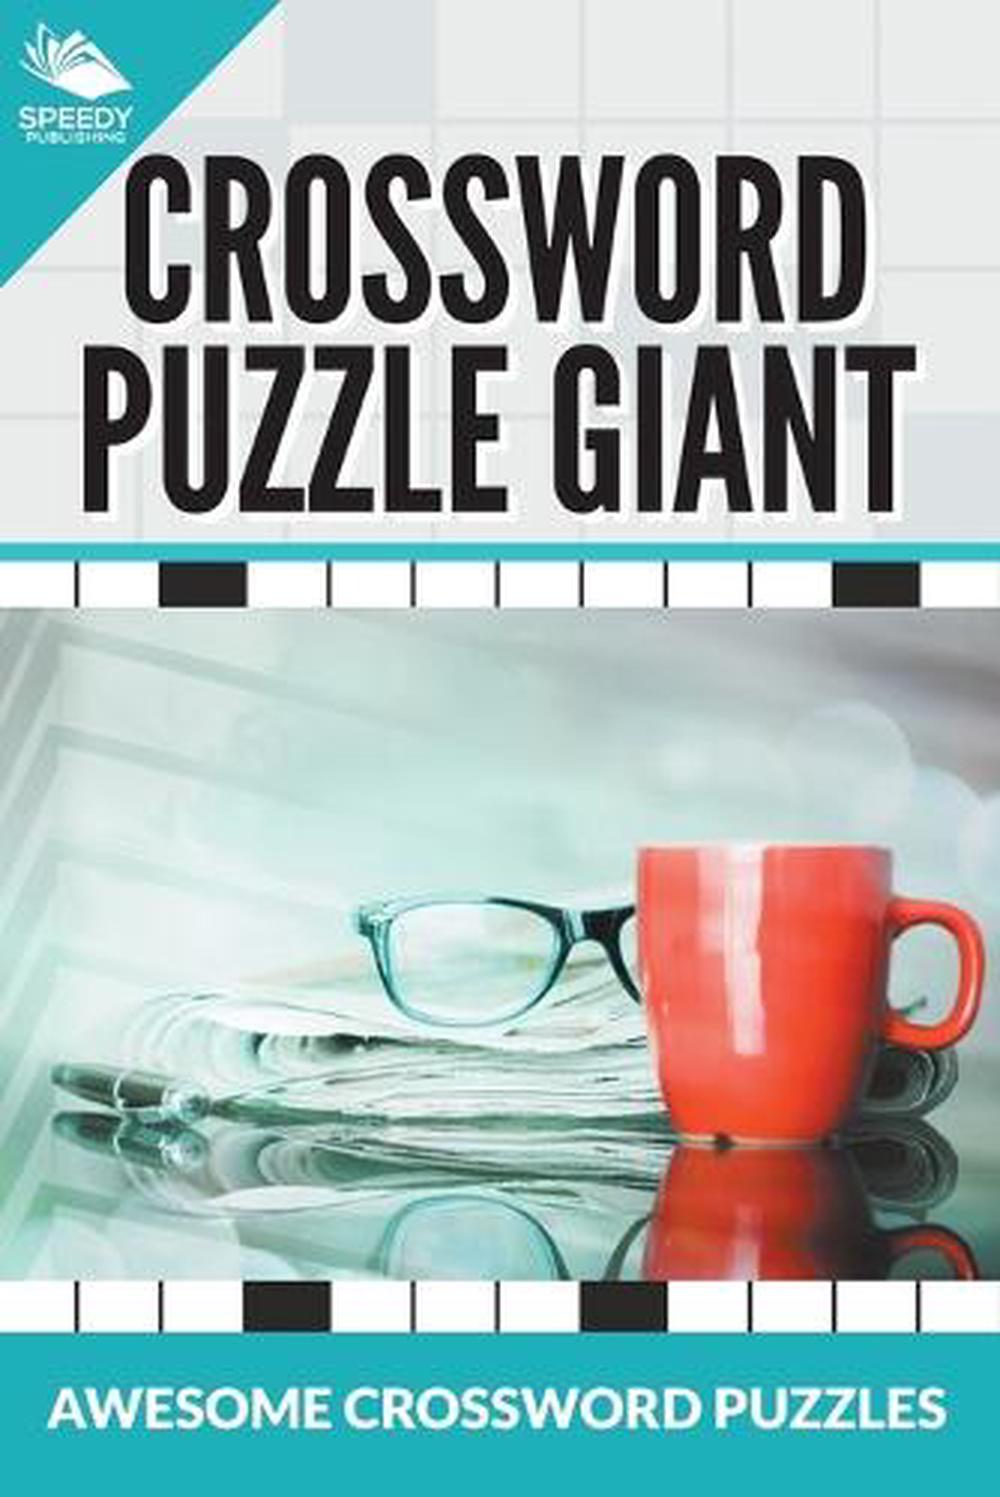 Crossword Puzzle Giant: Awesome Crossword Puzzles by Speedy Publishing